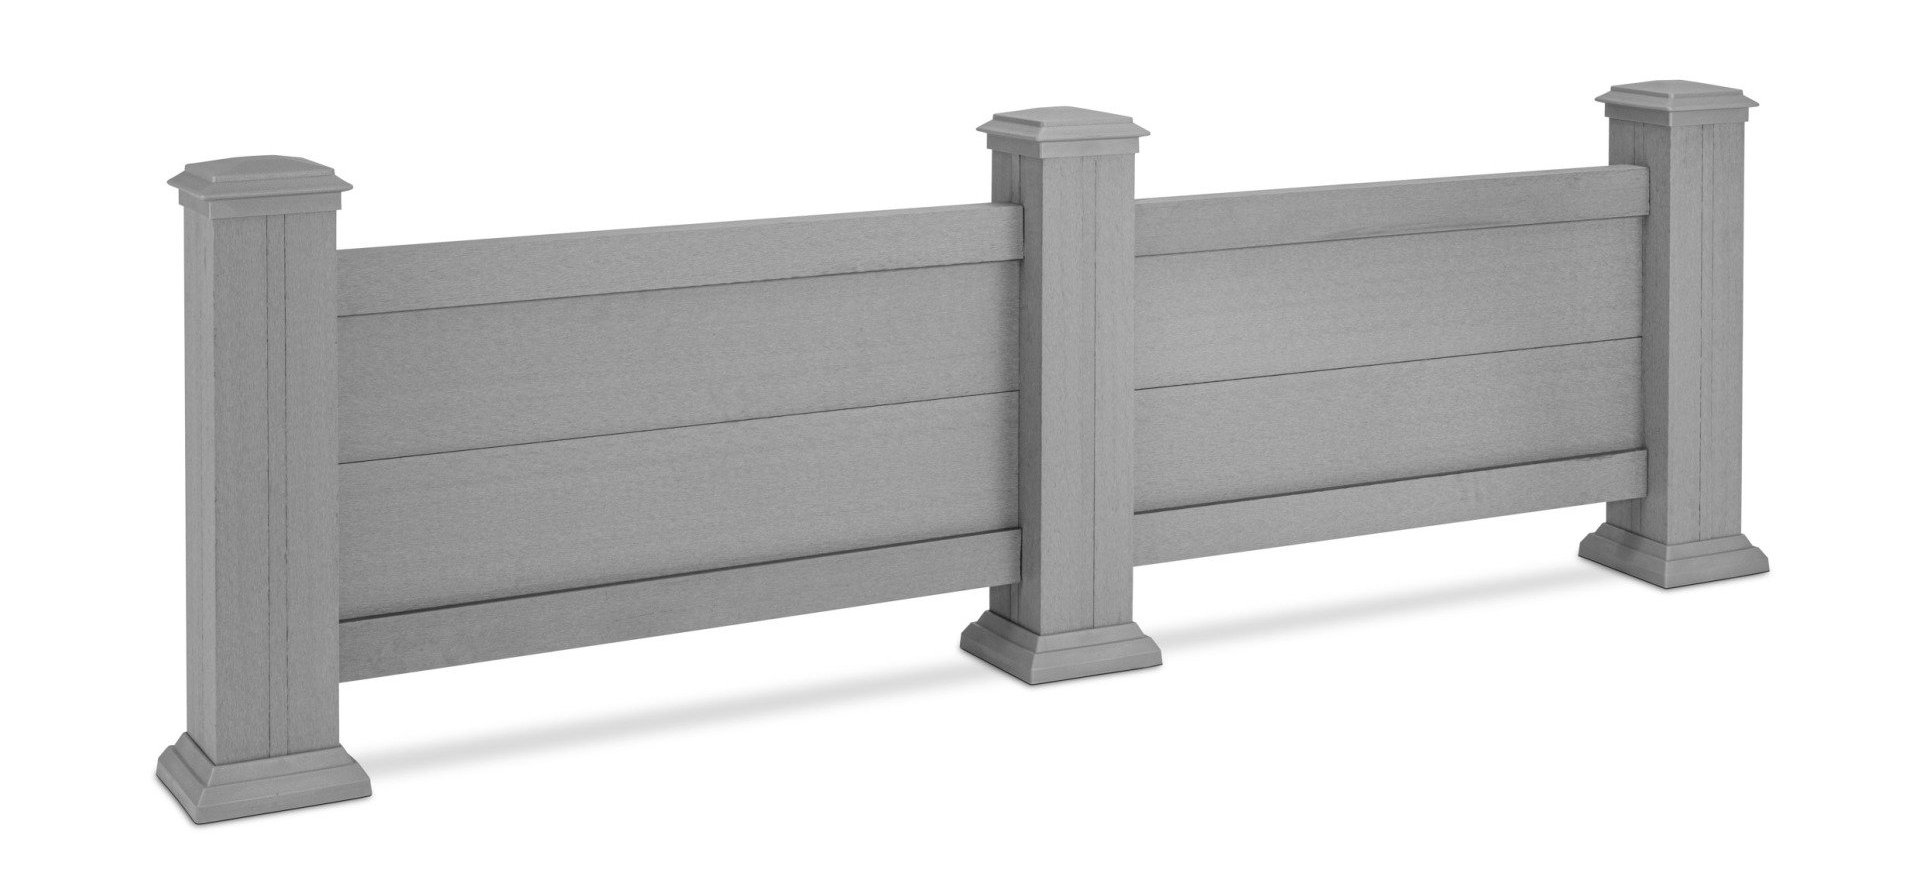 Wood Plastic Composite Fencing Kit Silver Grey